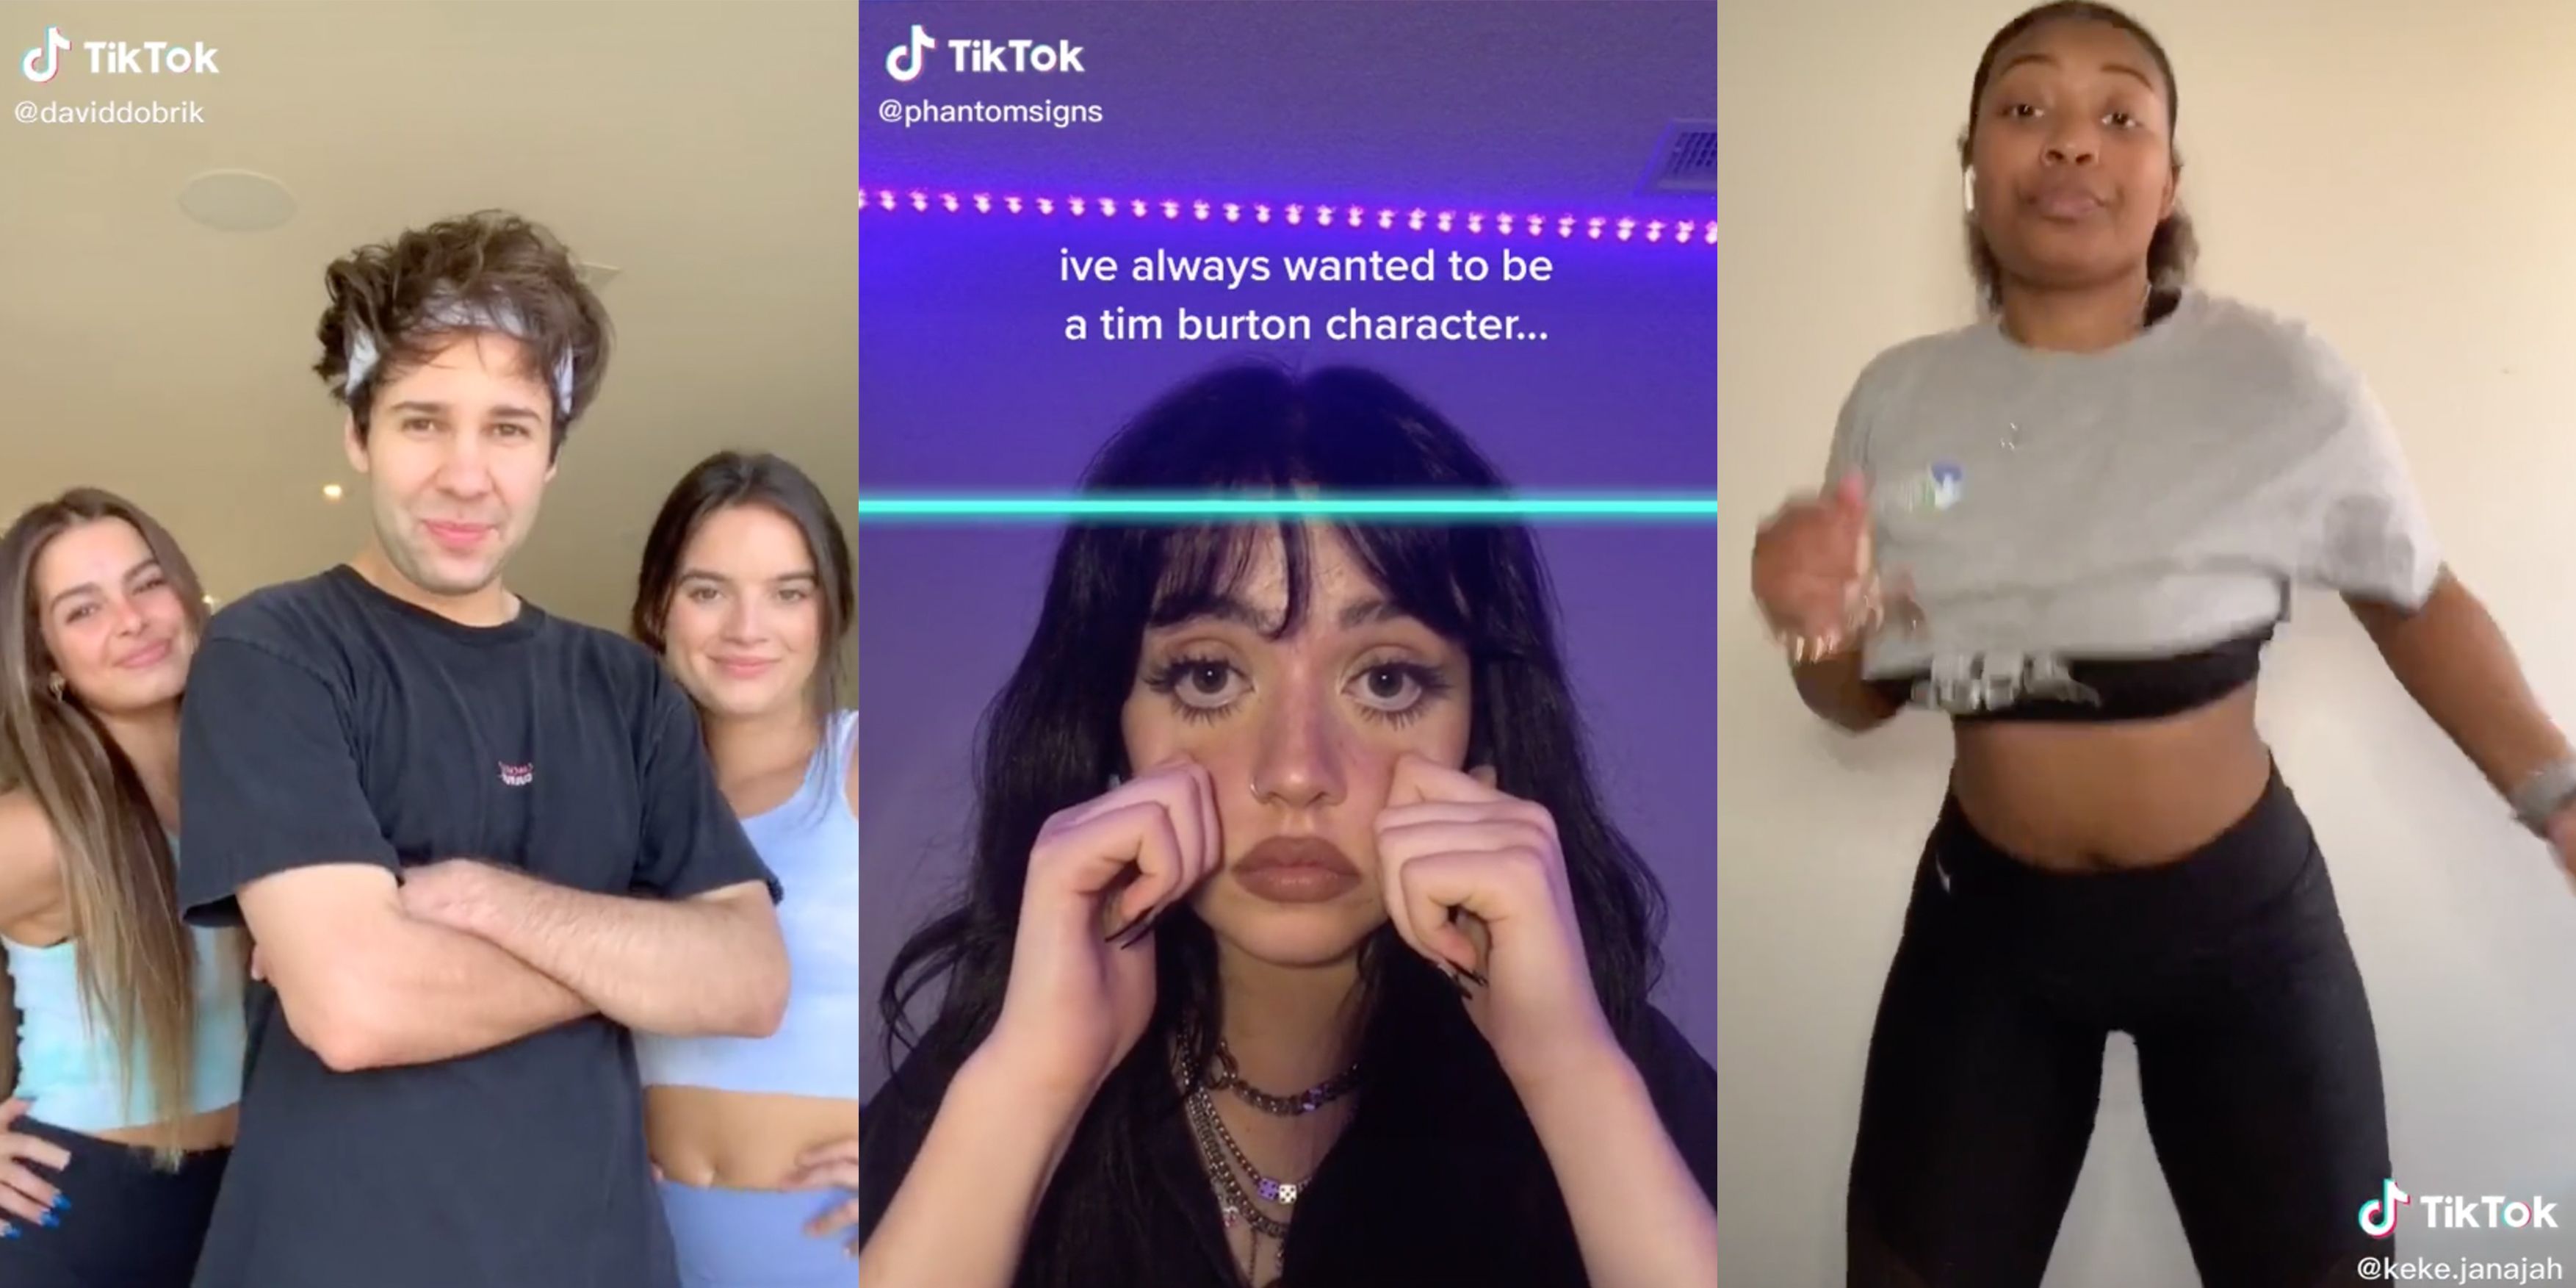 The Top TikTok Trends to Try This Week